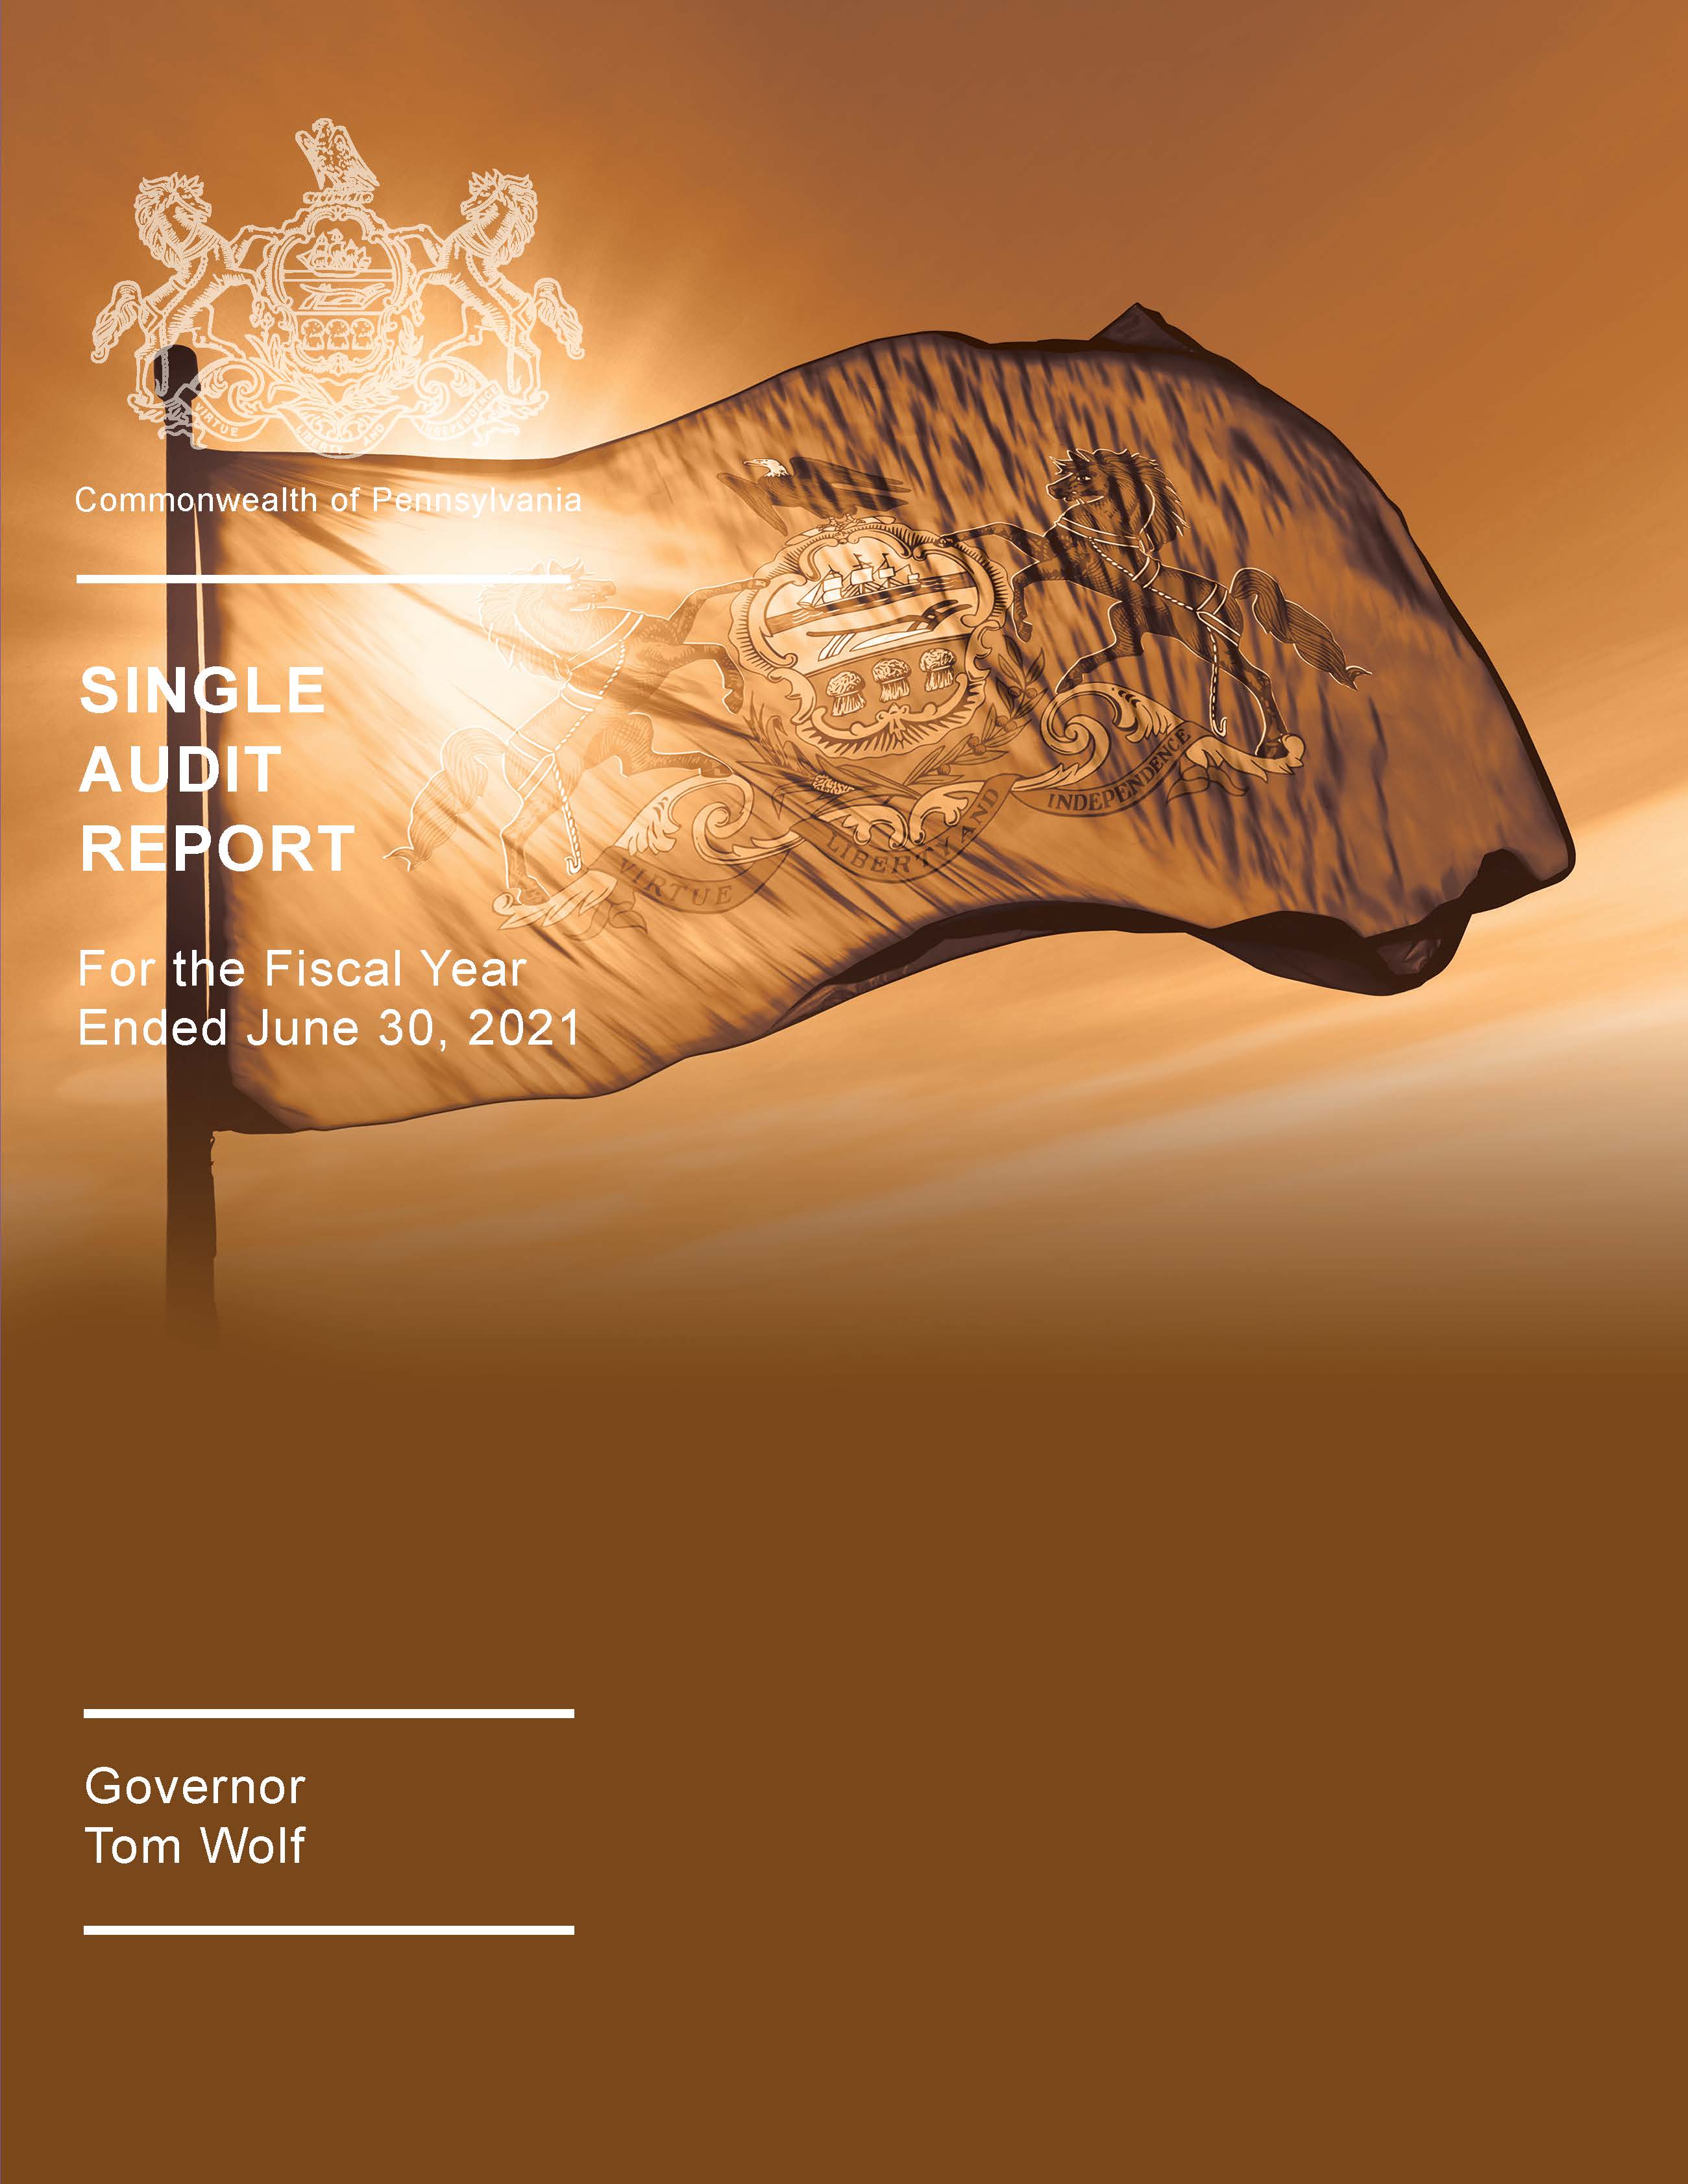 Image of the June 30, 2021 Single Audit Report Cover